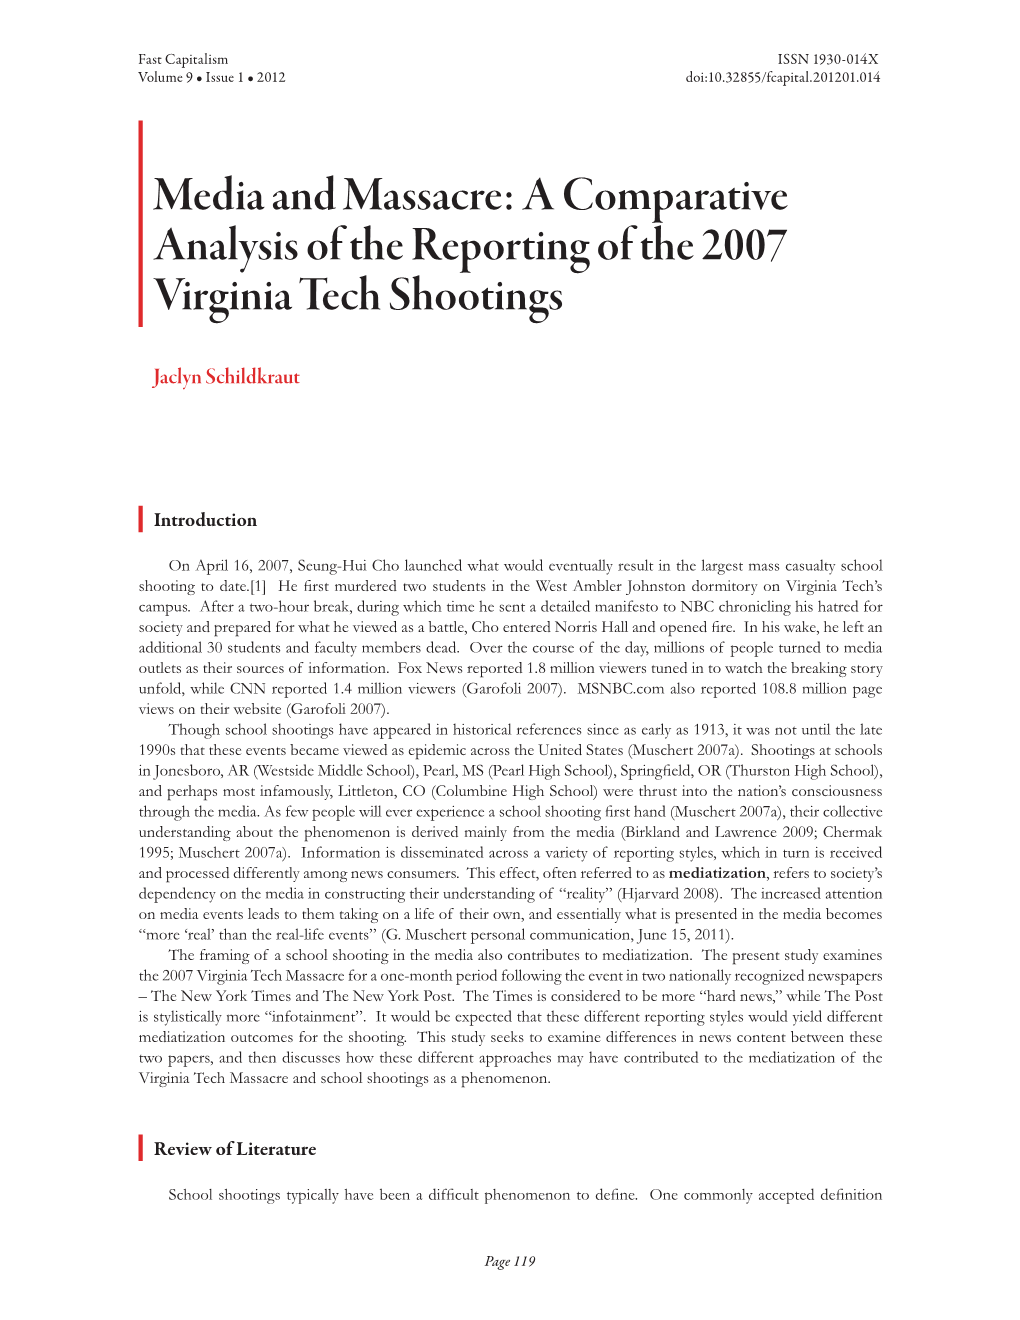 Media and Massacre: a Comparative Analysis of the Reporting of the 2007 Virginia Tech Shootings